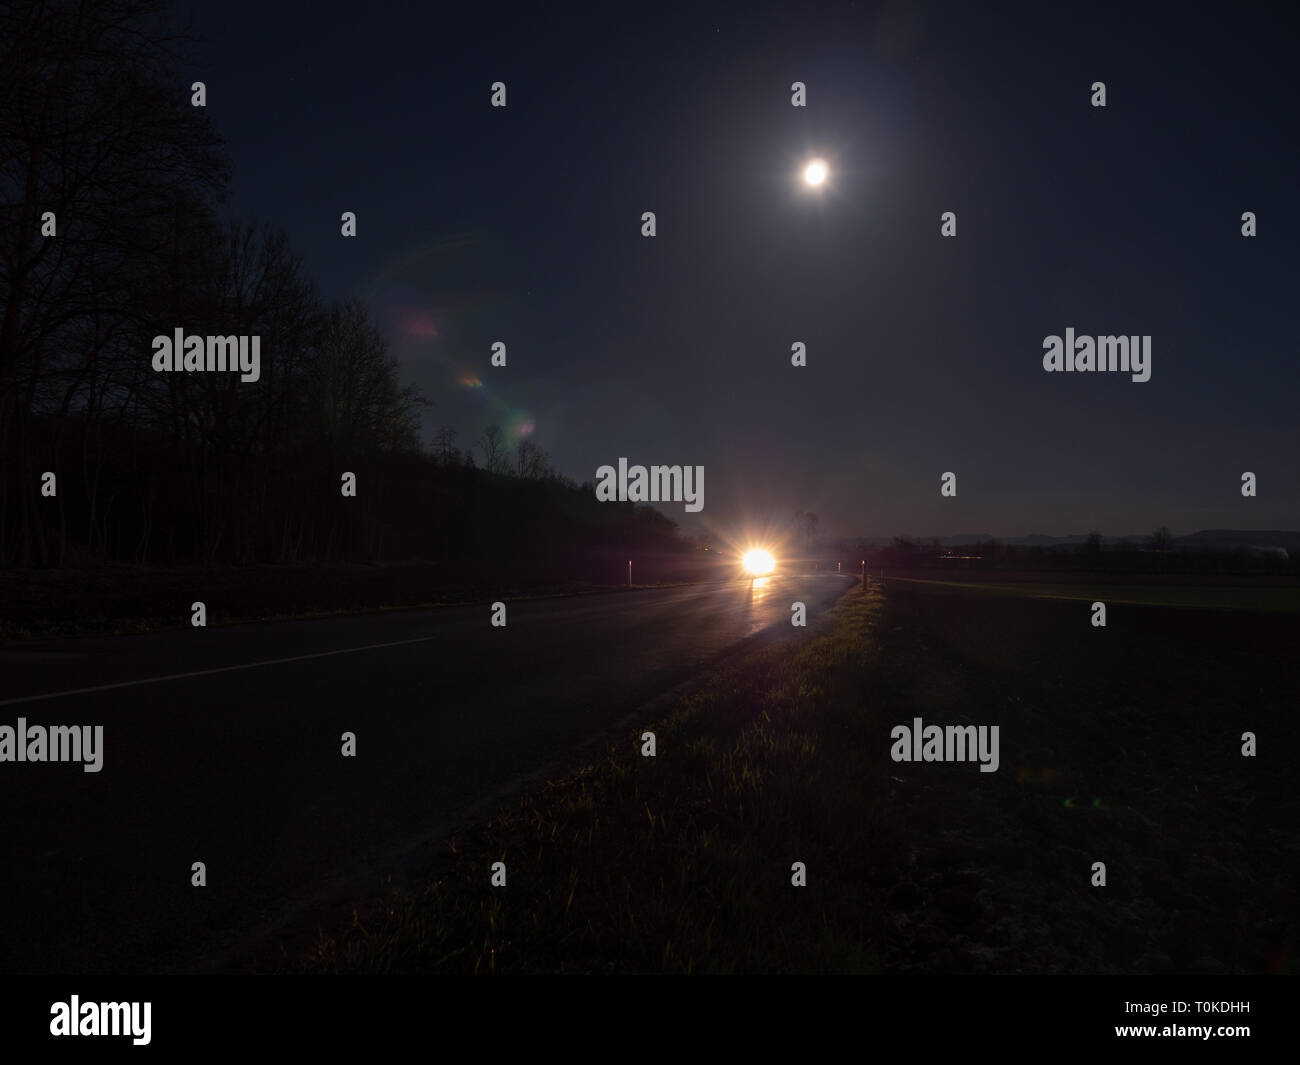 Winding Country Road Illuminated by the Headlights of an Approaching Car with Full Moon and Mysterious Landscape Stock Photo